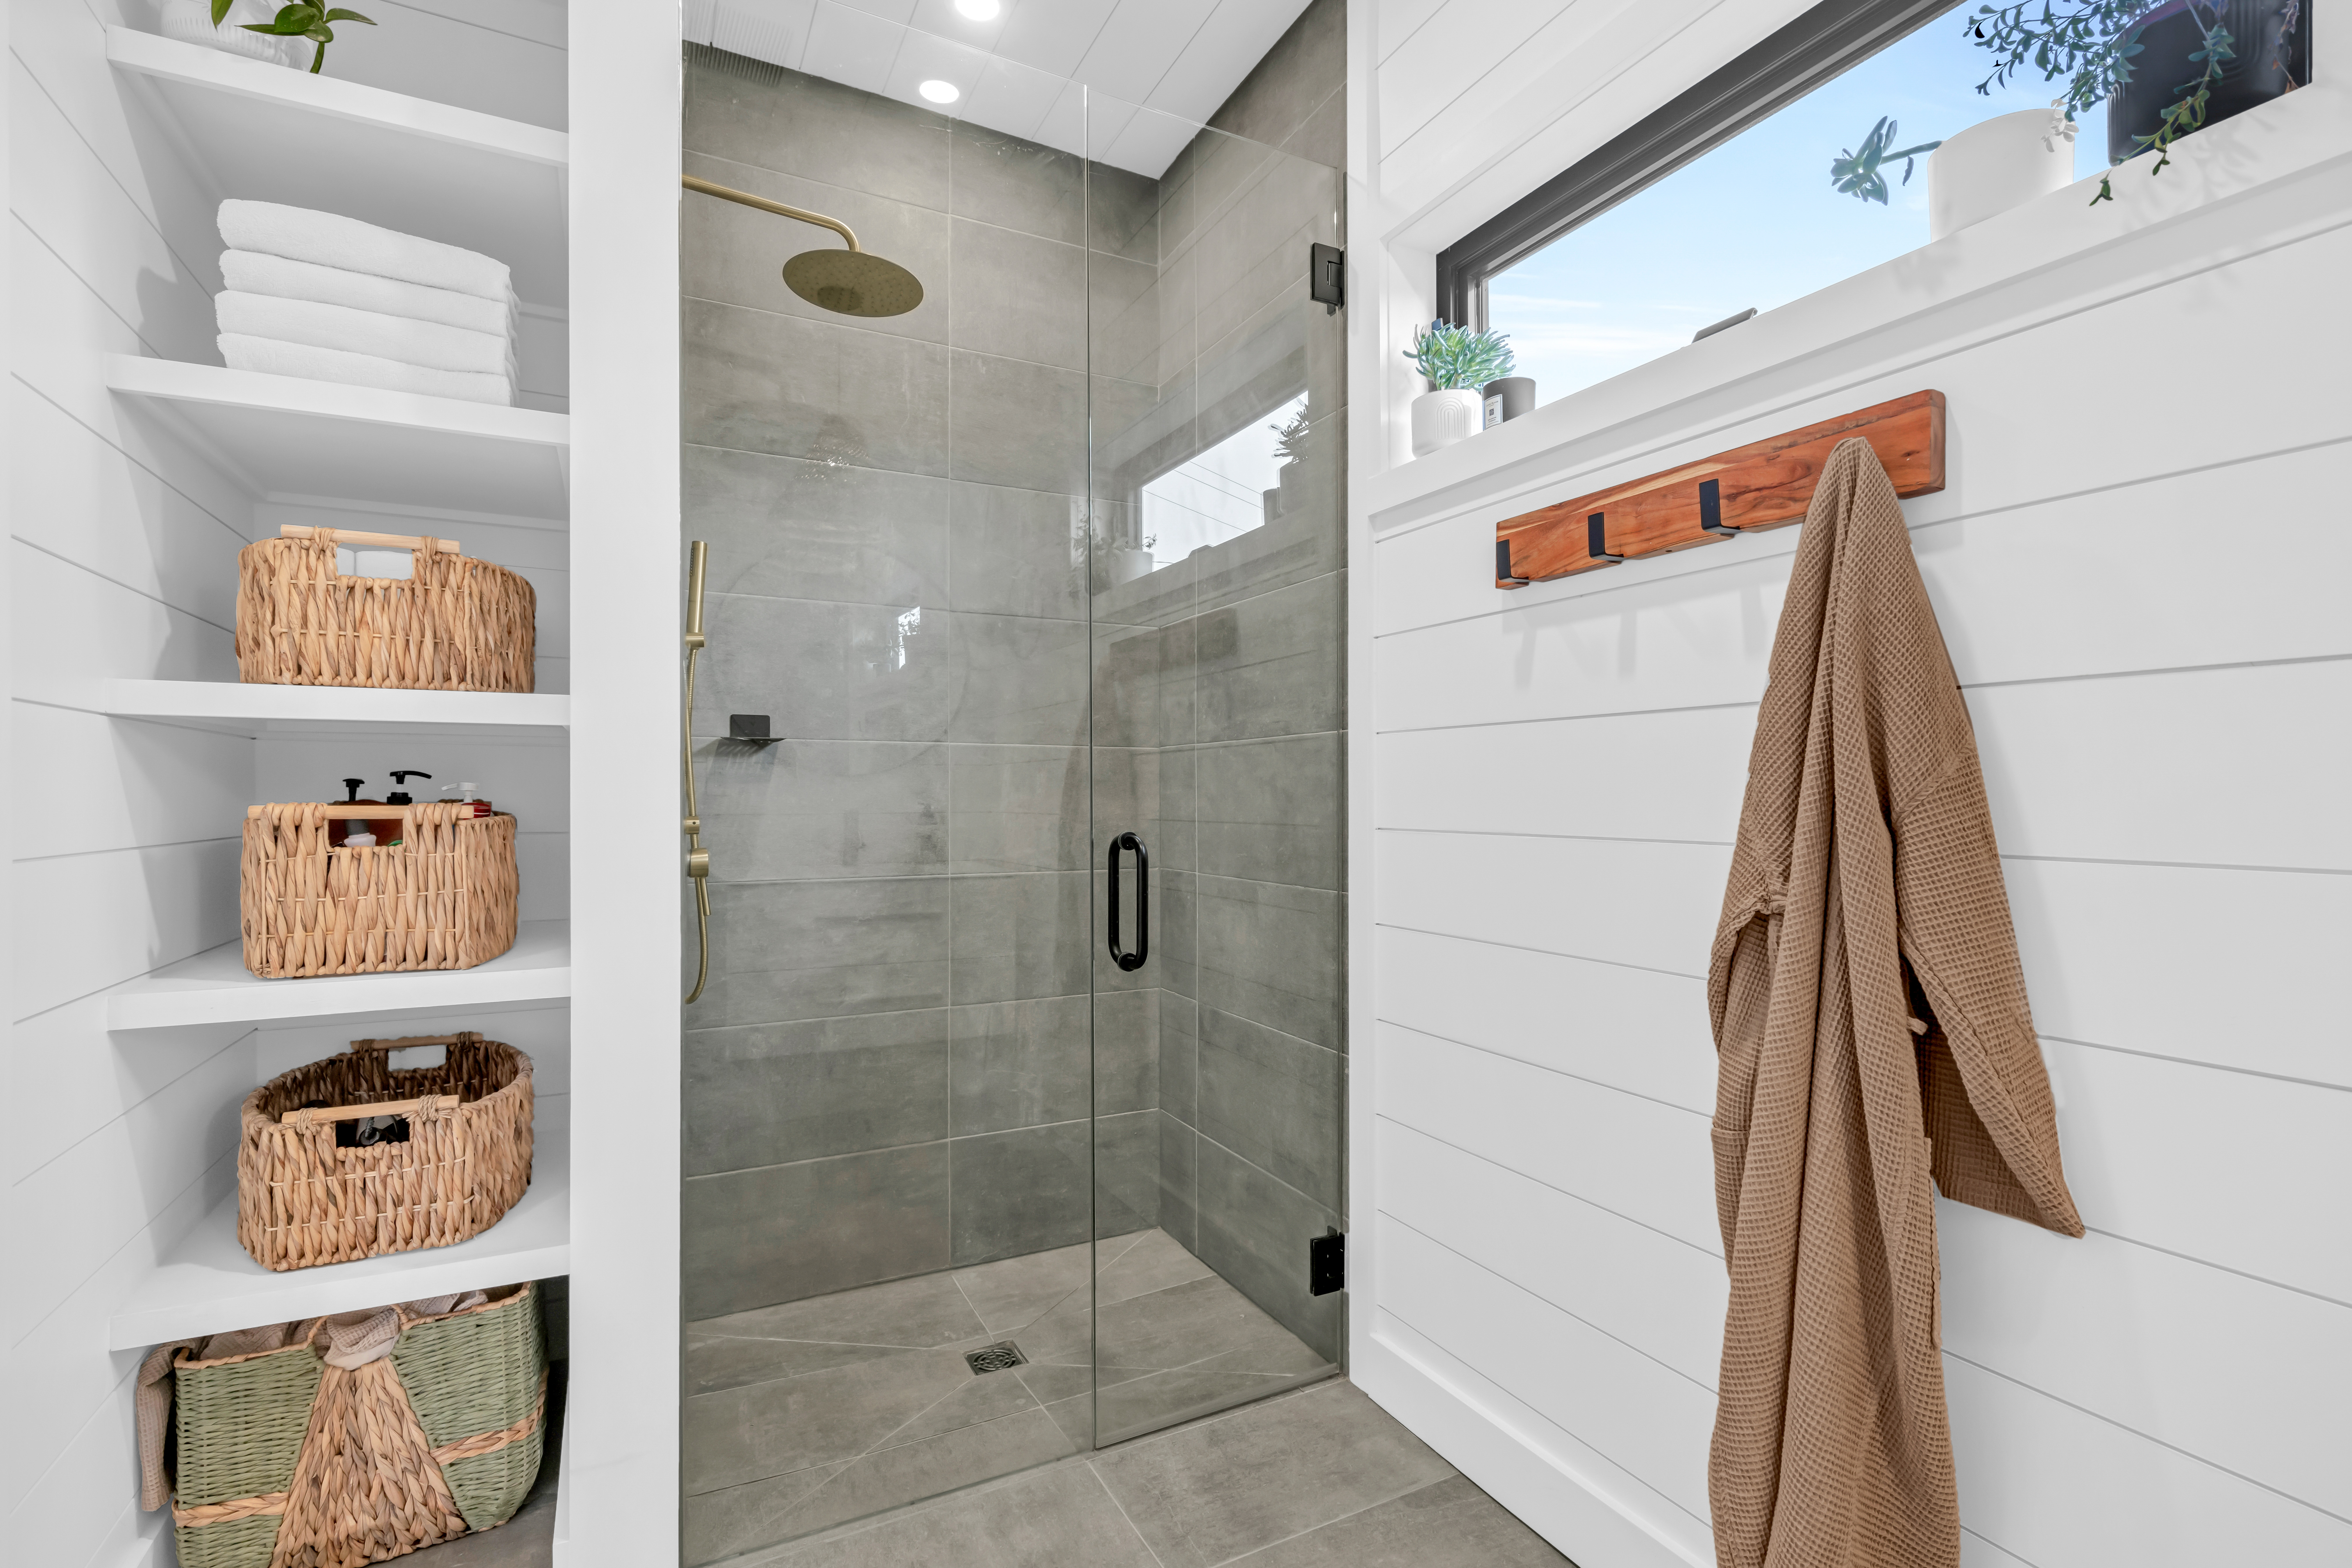 A bathroom with a spacious walk-in shower and a long window.